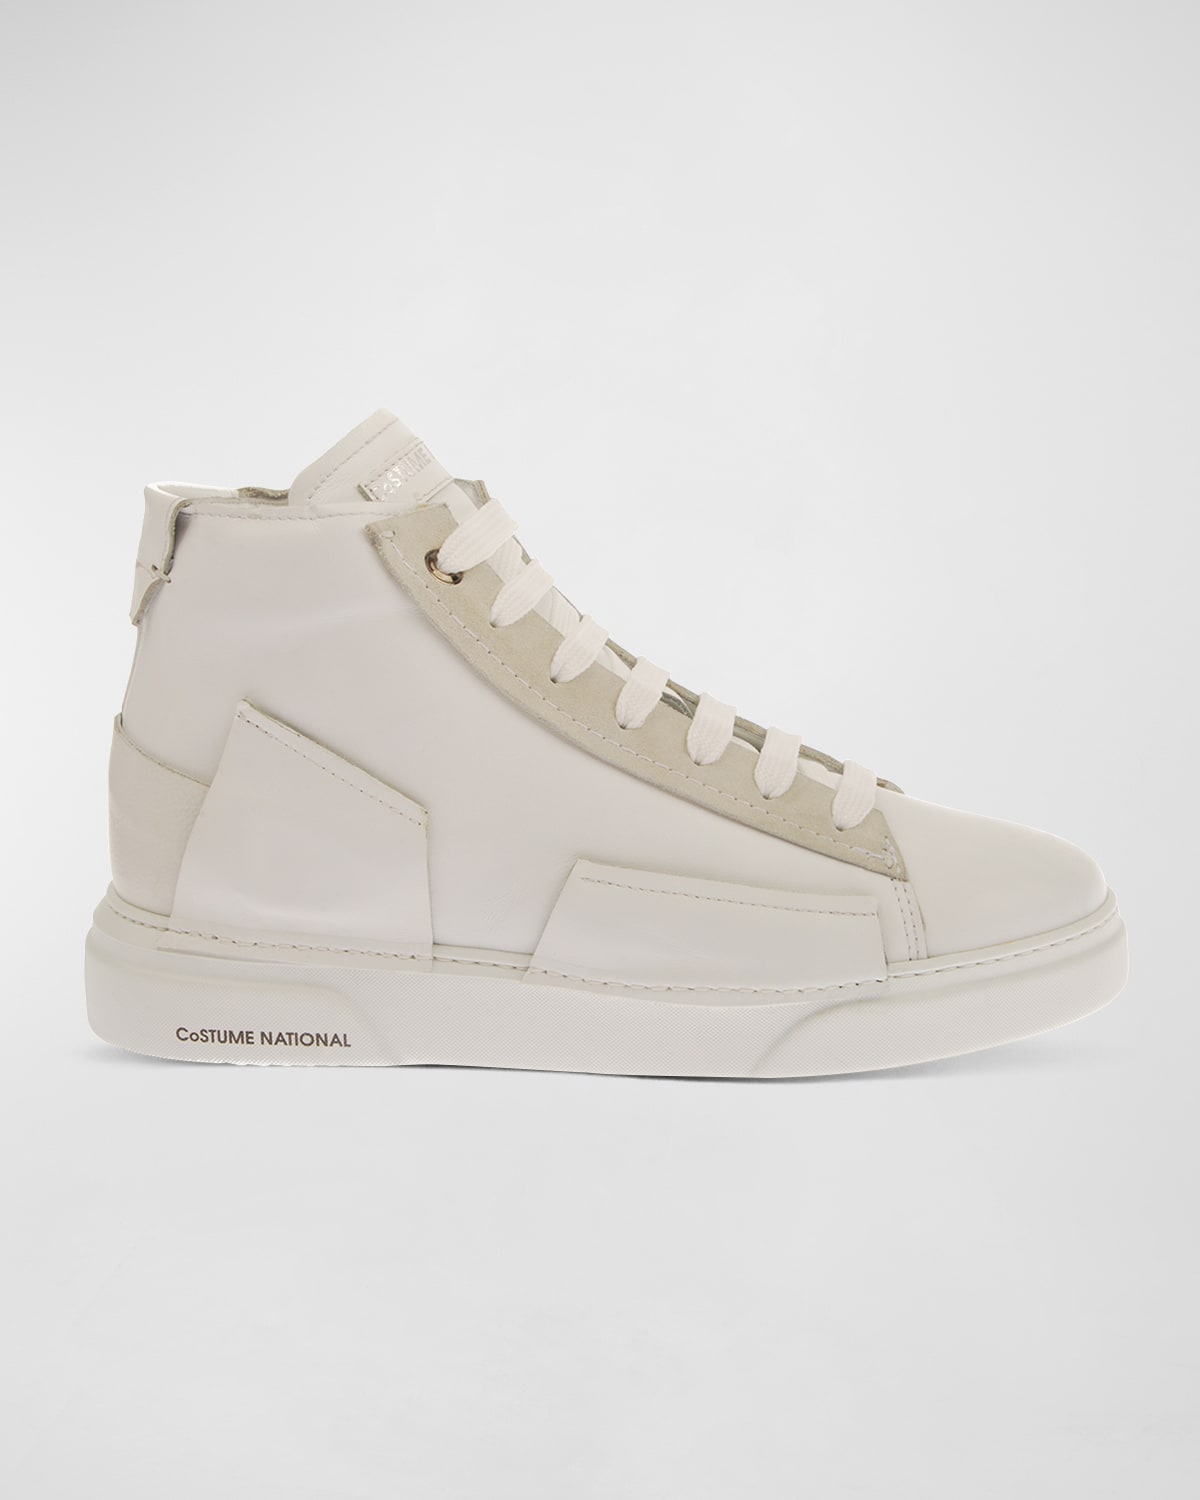 Men's Patch Suede & Leather High-Top Sneakers